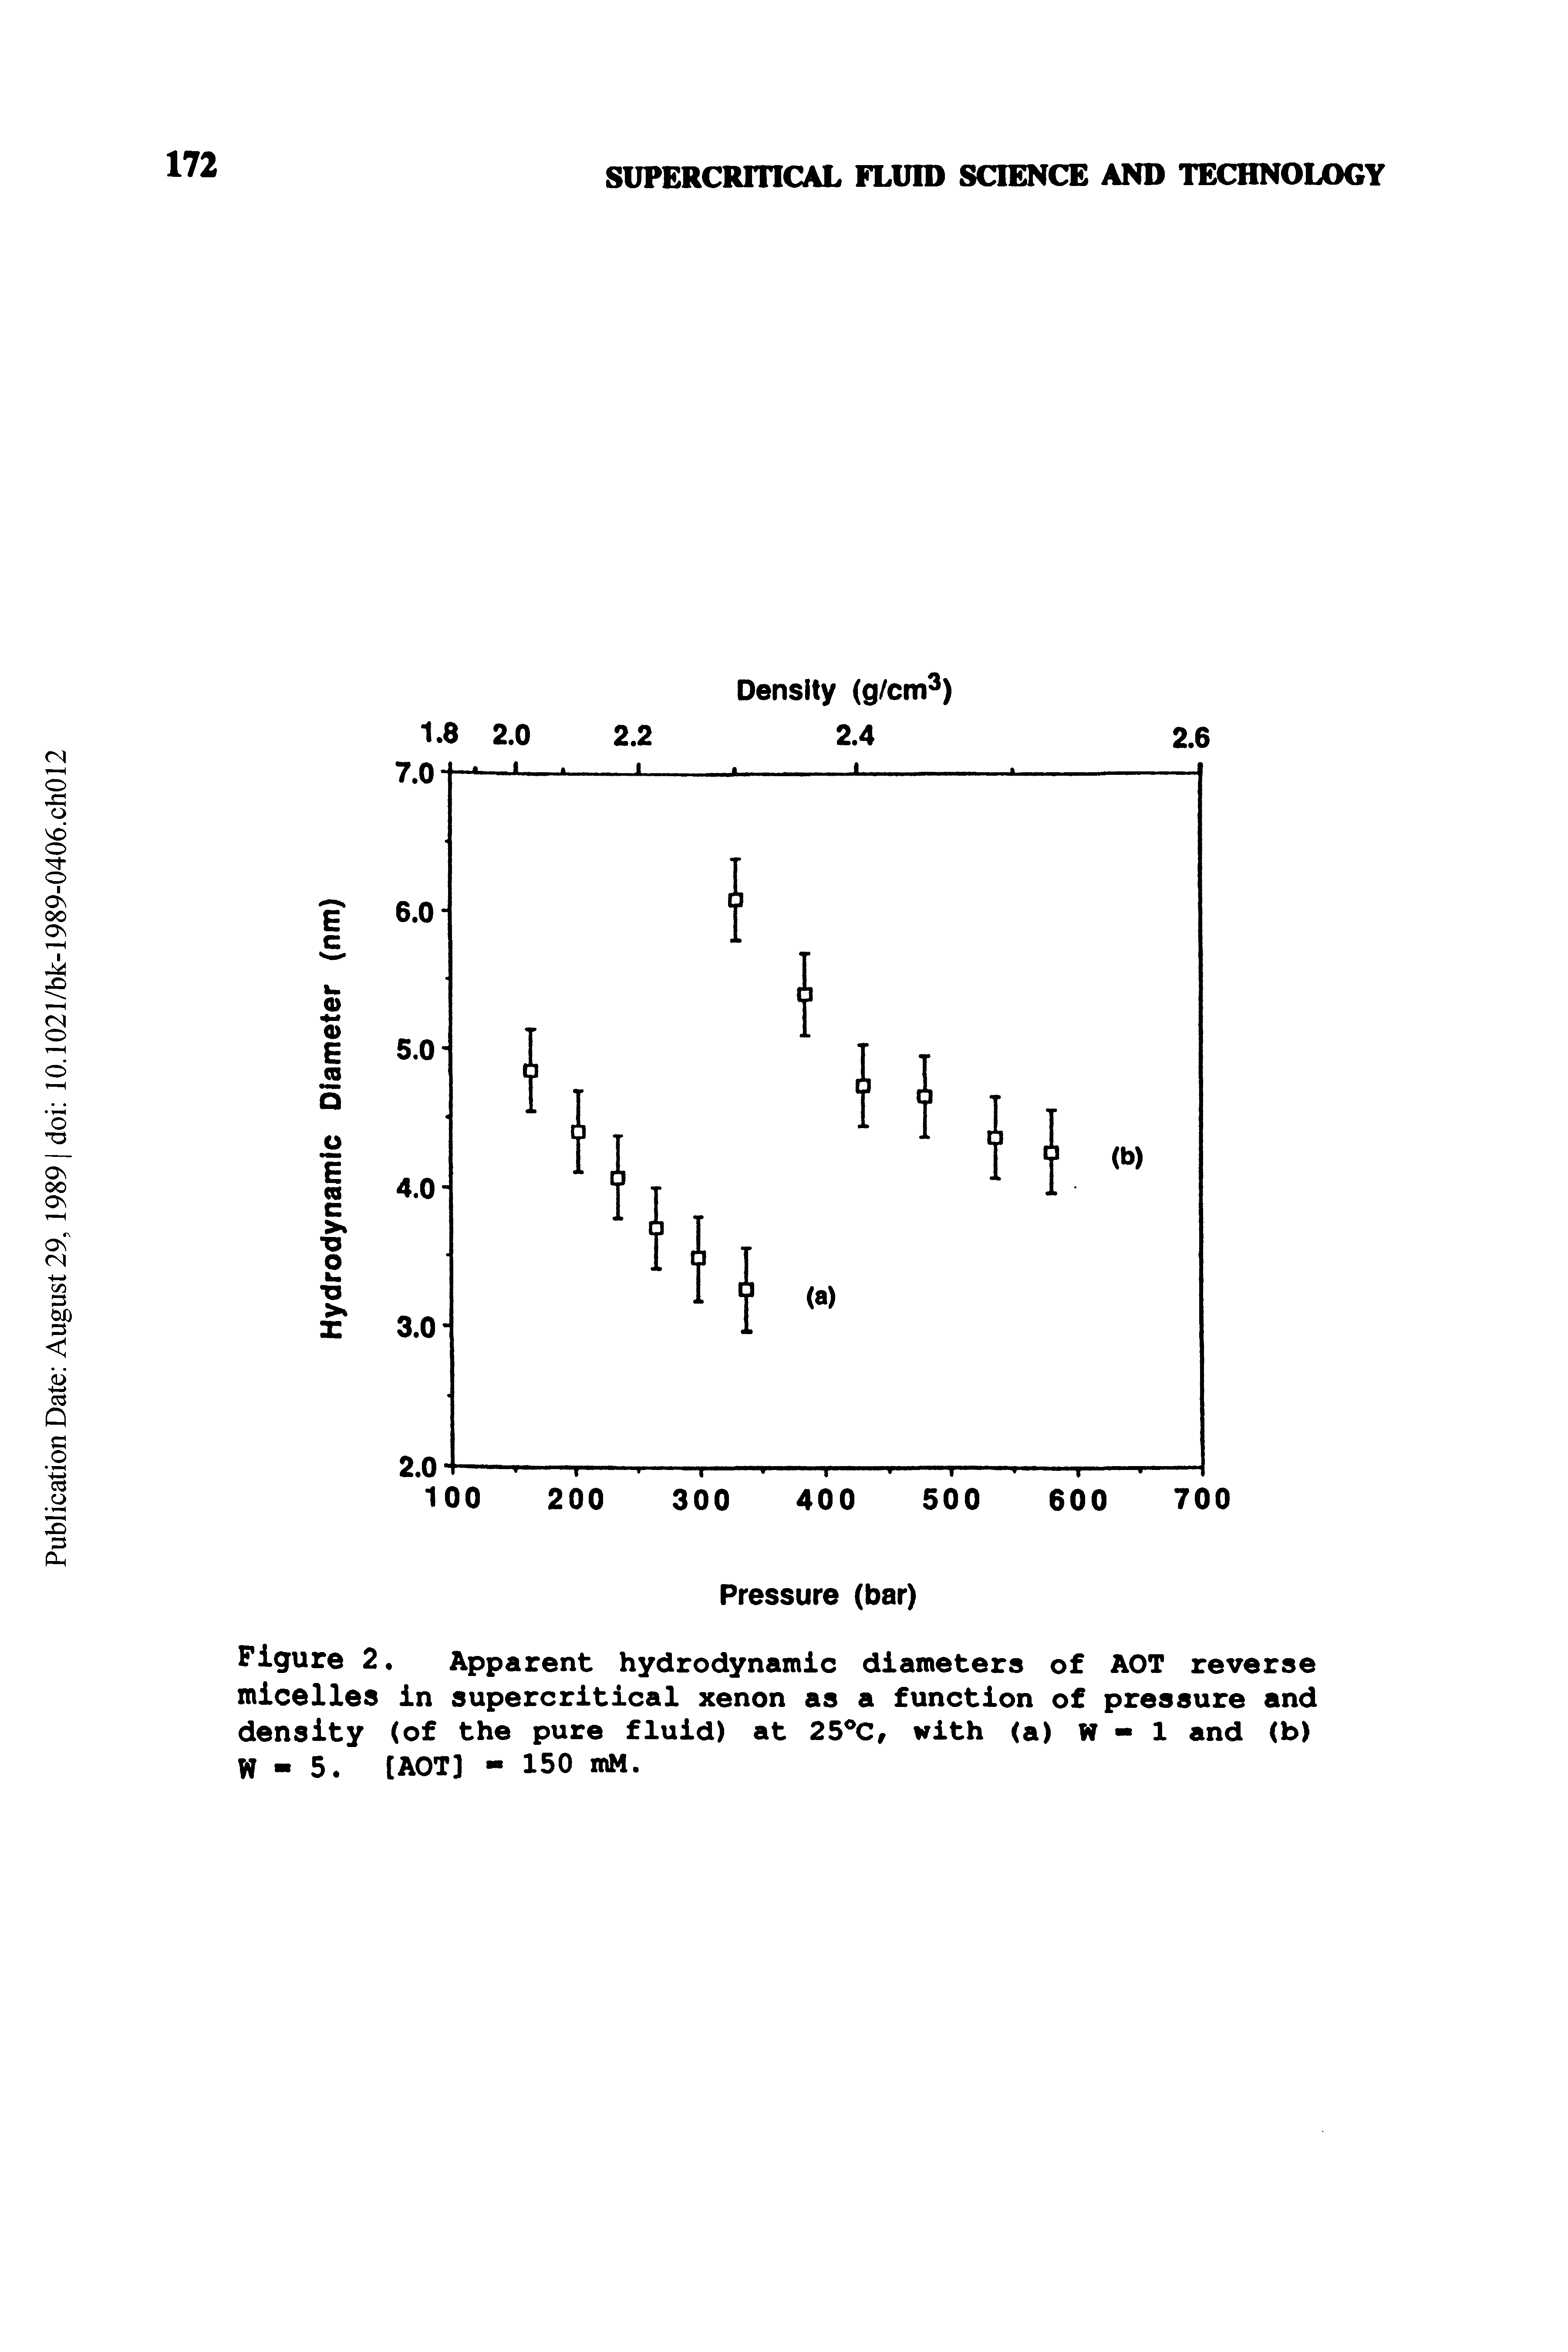 Figure 2. Apparent hydrodynamic diameters of AOT reverse micelles In supercritical xenon as a function of pressure and density (of the pure fluid) at 25 C, with (a) W - 1 and (b) W - 5. (AOT) - 150 mM.